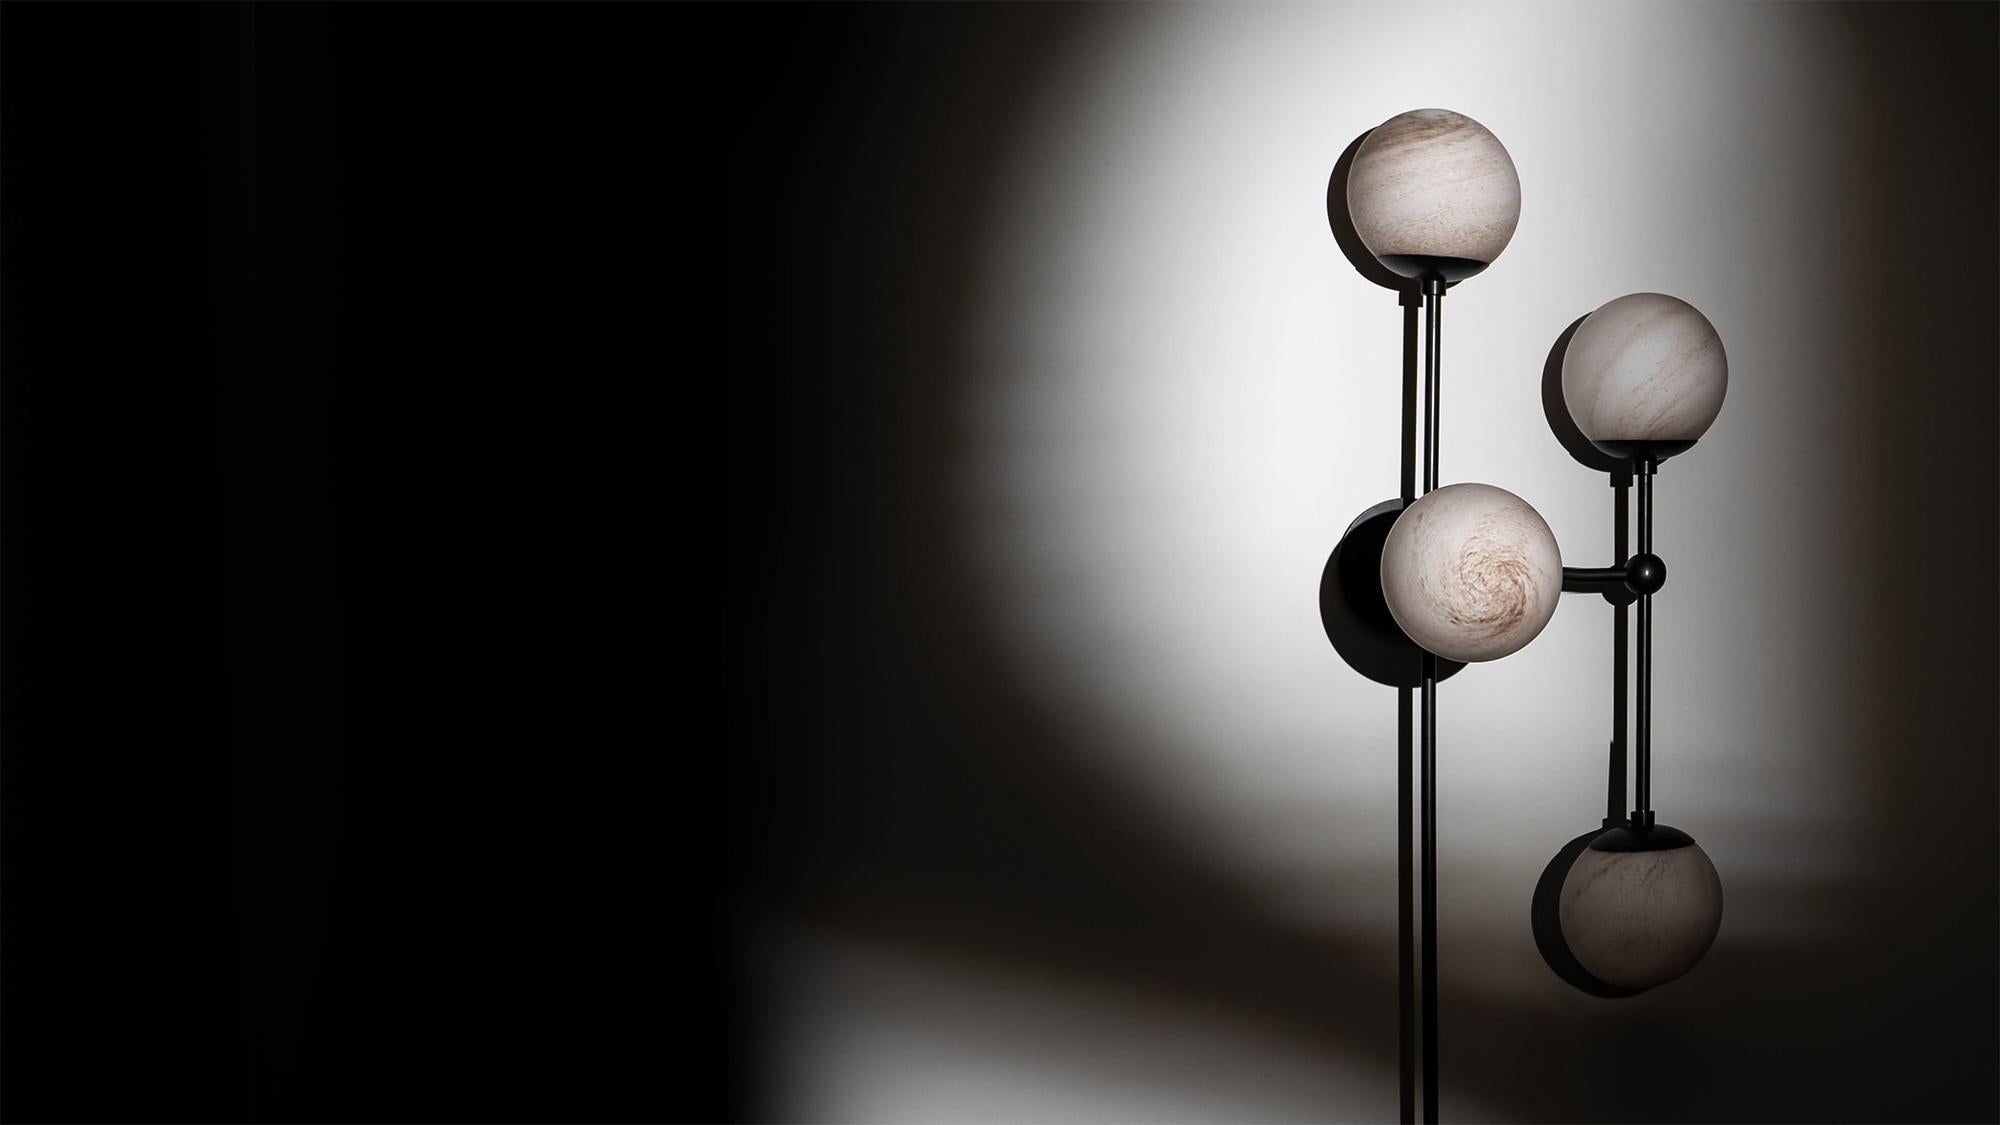 Armstrong 6 captures a sense of movement. Forms connect with spontaneous energy, punctuated by glass spheres. Linear elements complement the carefully crafted brass, echoing a reinforced internal skeleton. The flush mount base gives this lamp